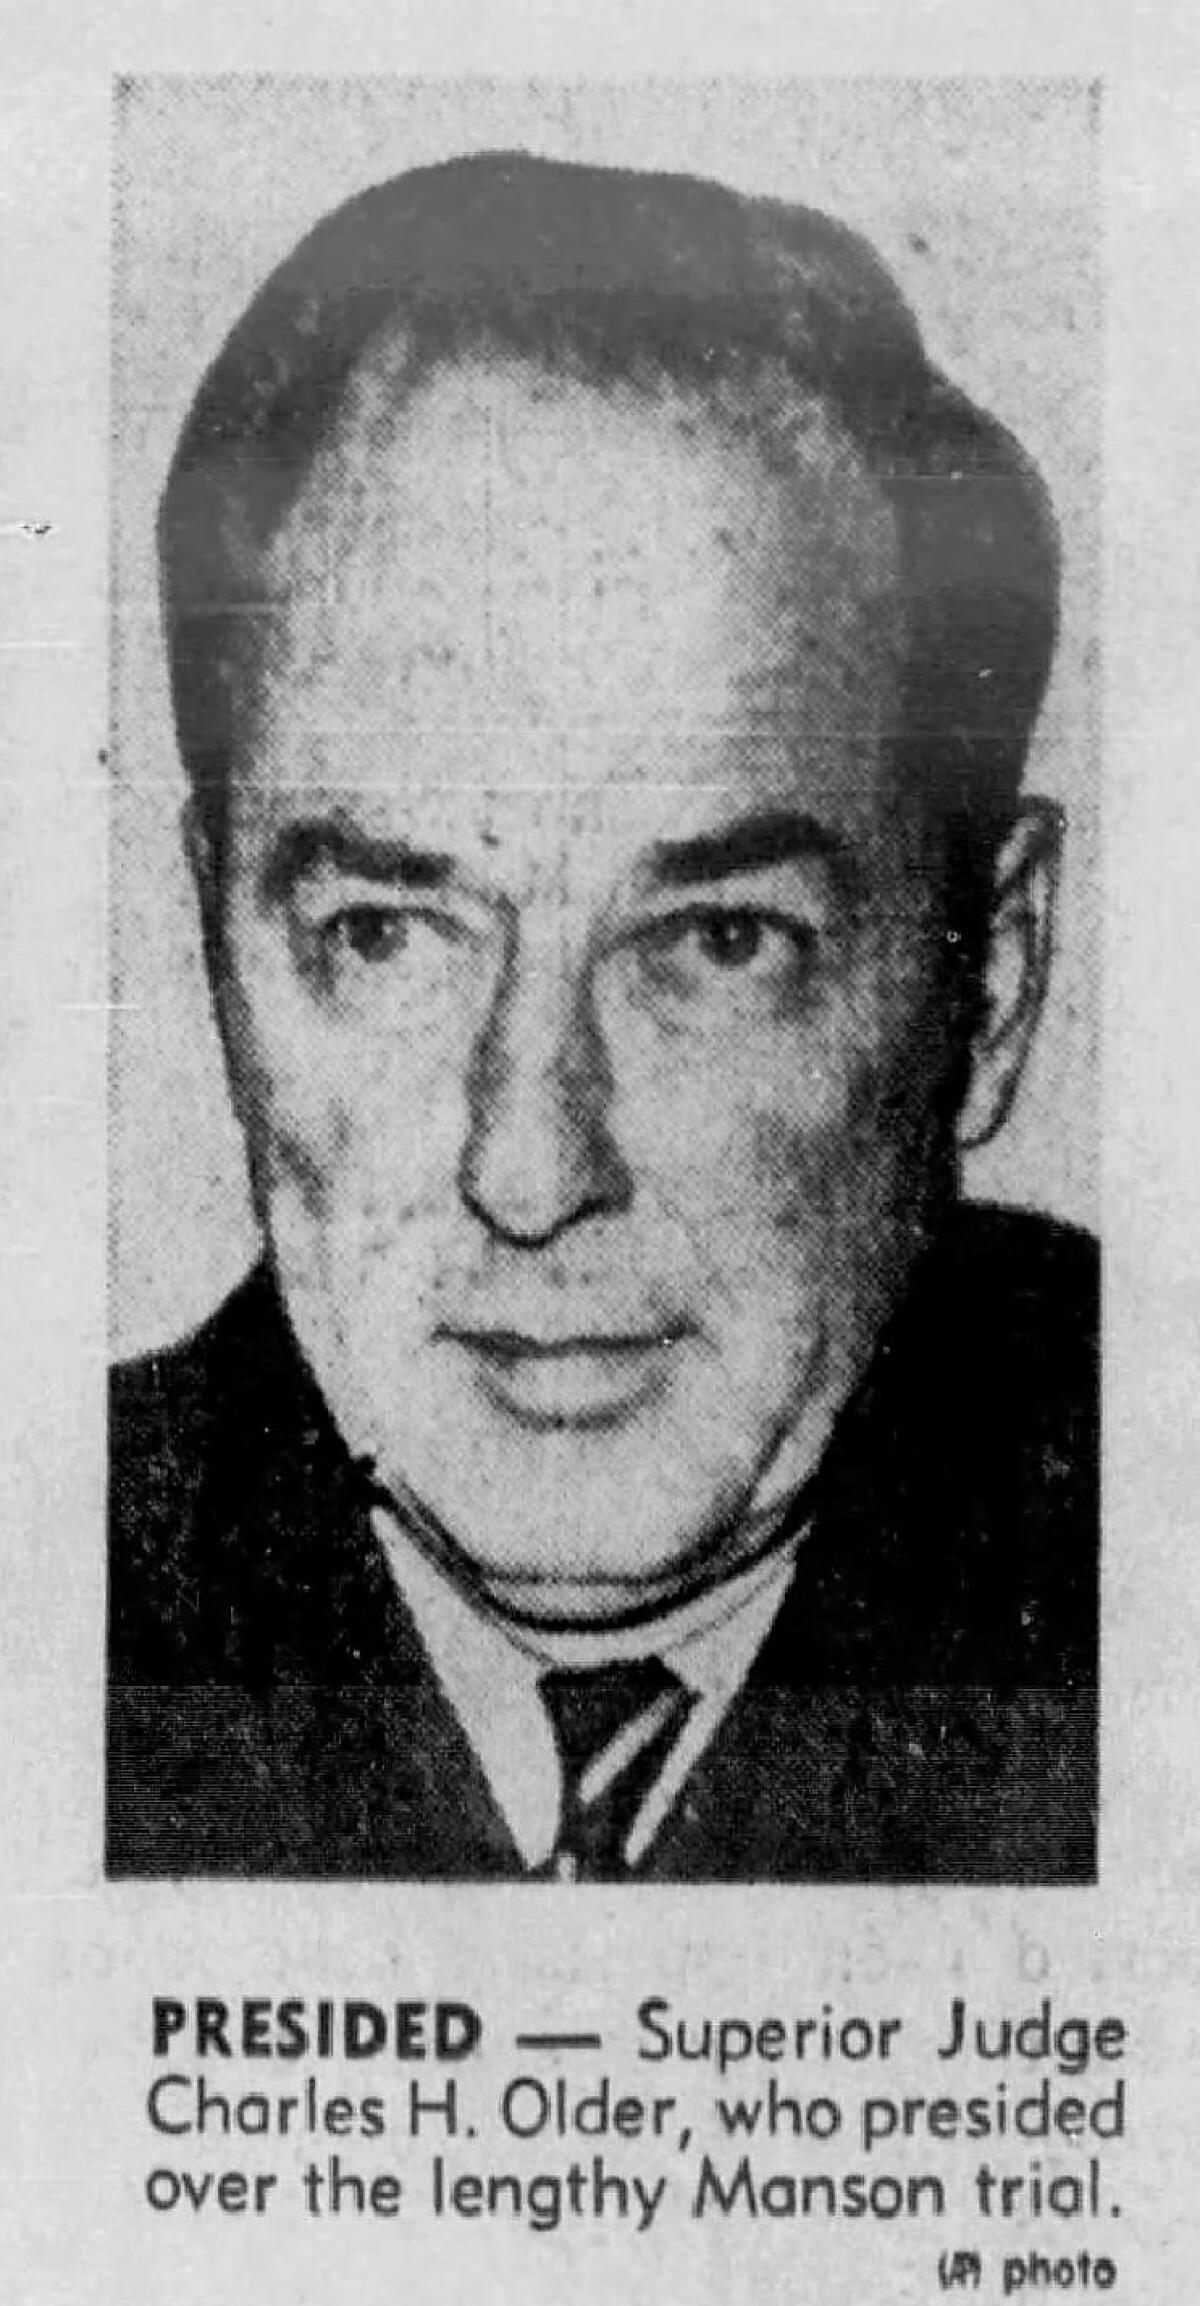 Superior Judge Charles H. Older, who presided over the lengthy Manson trial